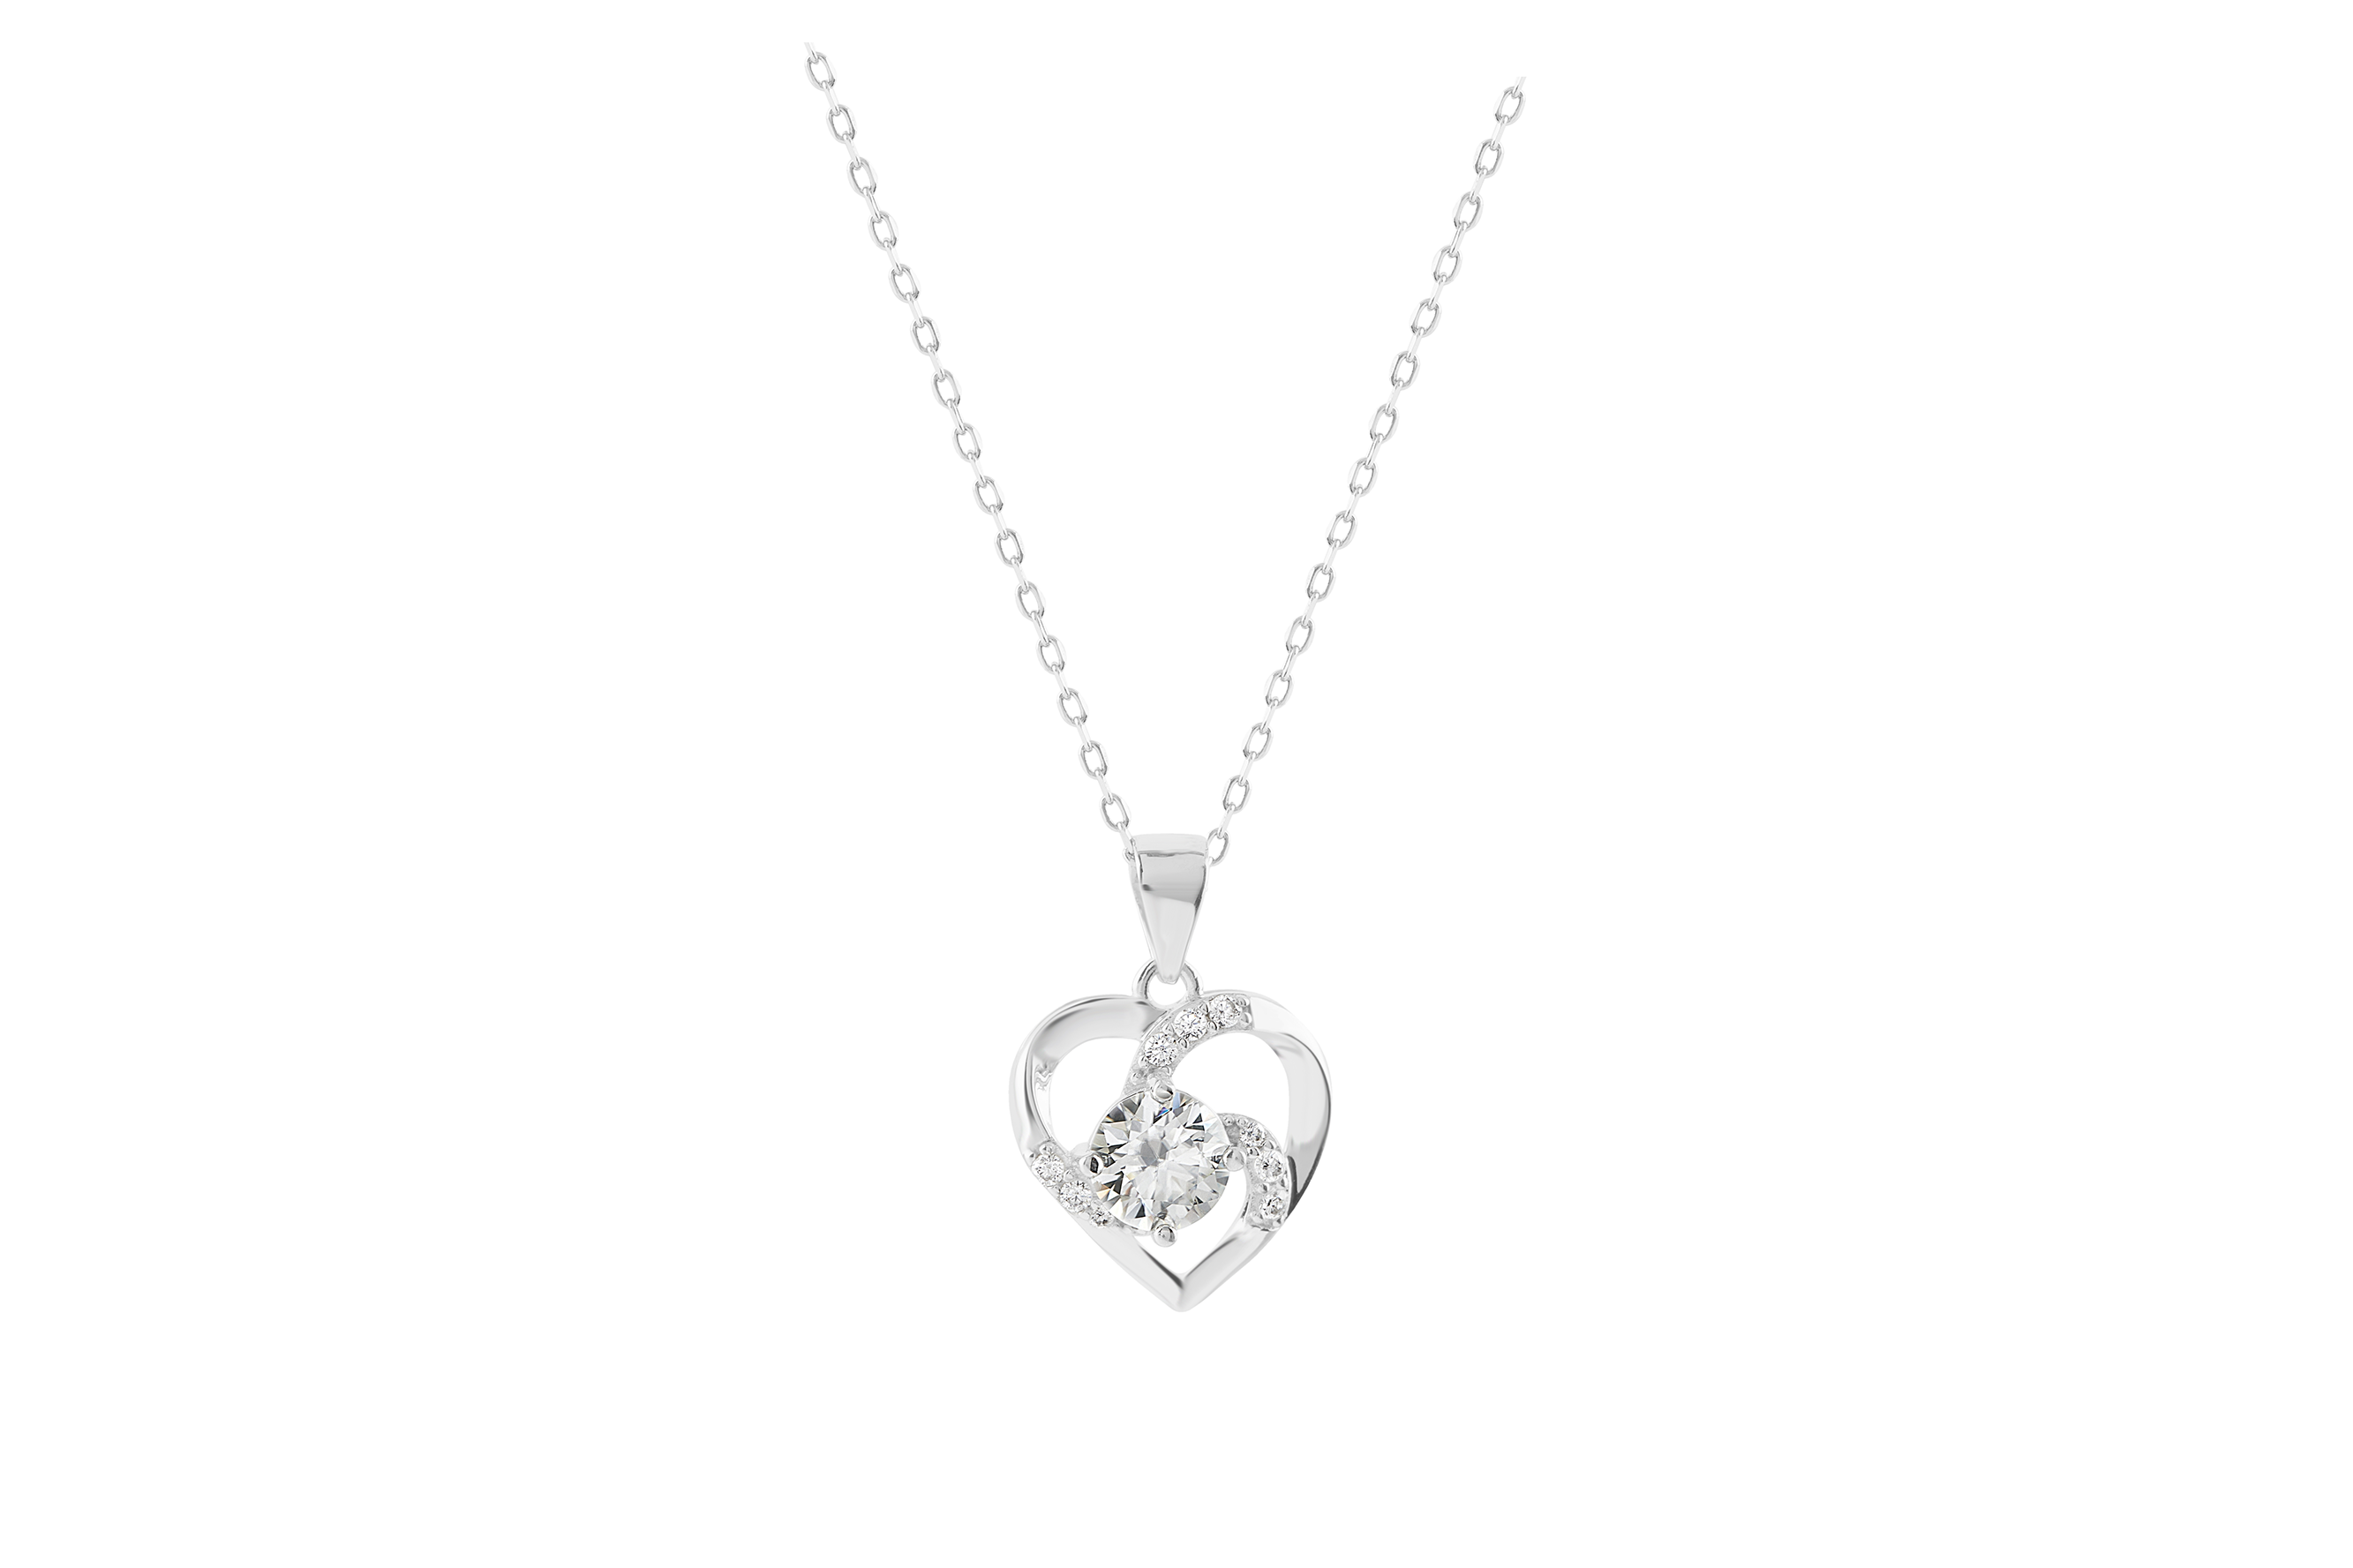 Abstract Heart Moissanite Stone Pendant with Sterling Silver Chain 